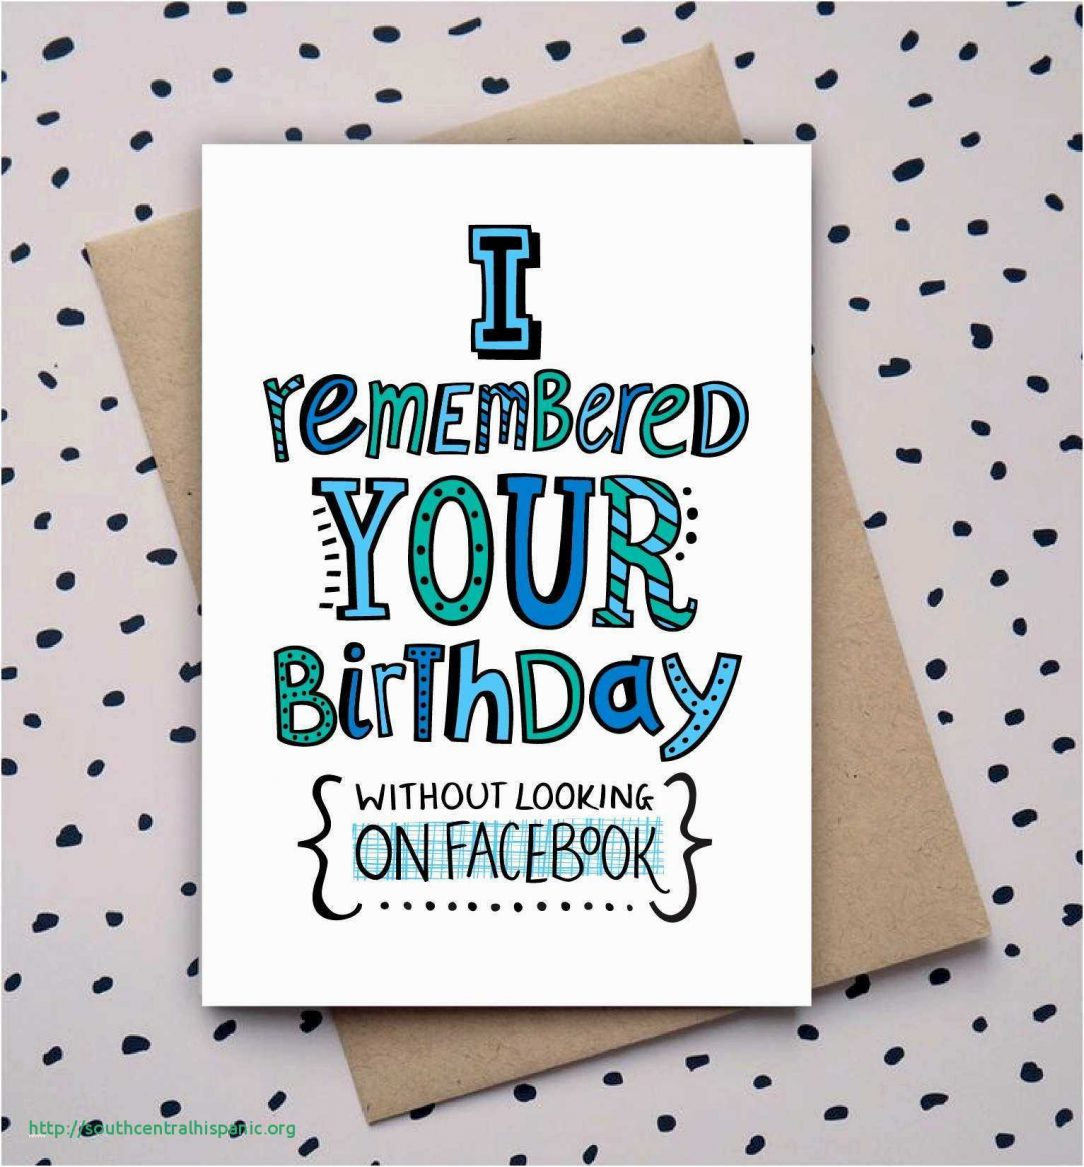 Cute Birthday Card Ideas Cute Birthday Card Ideas For Dad Dads Cards Handmade Wording Text A